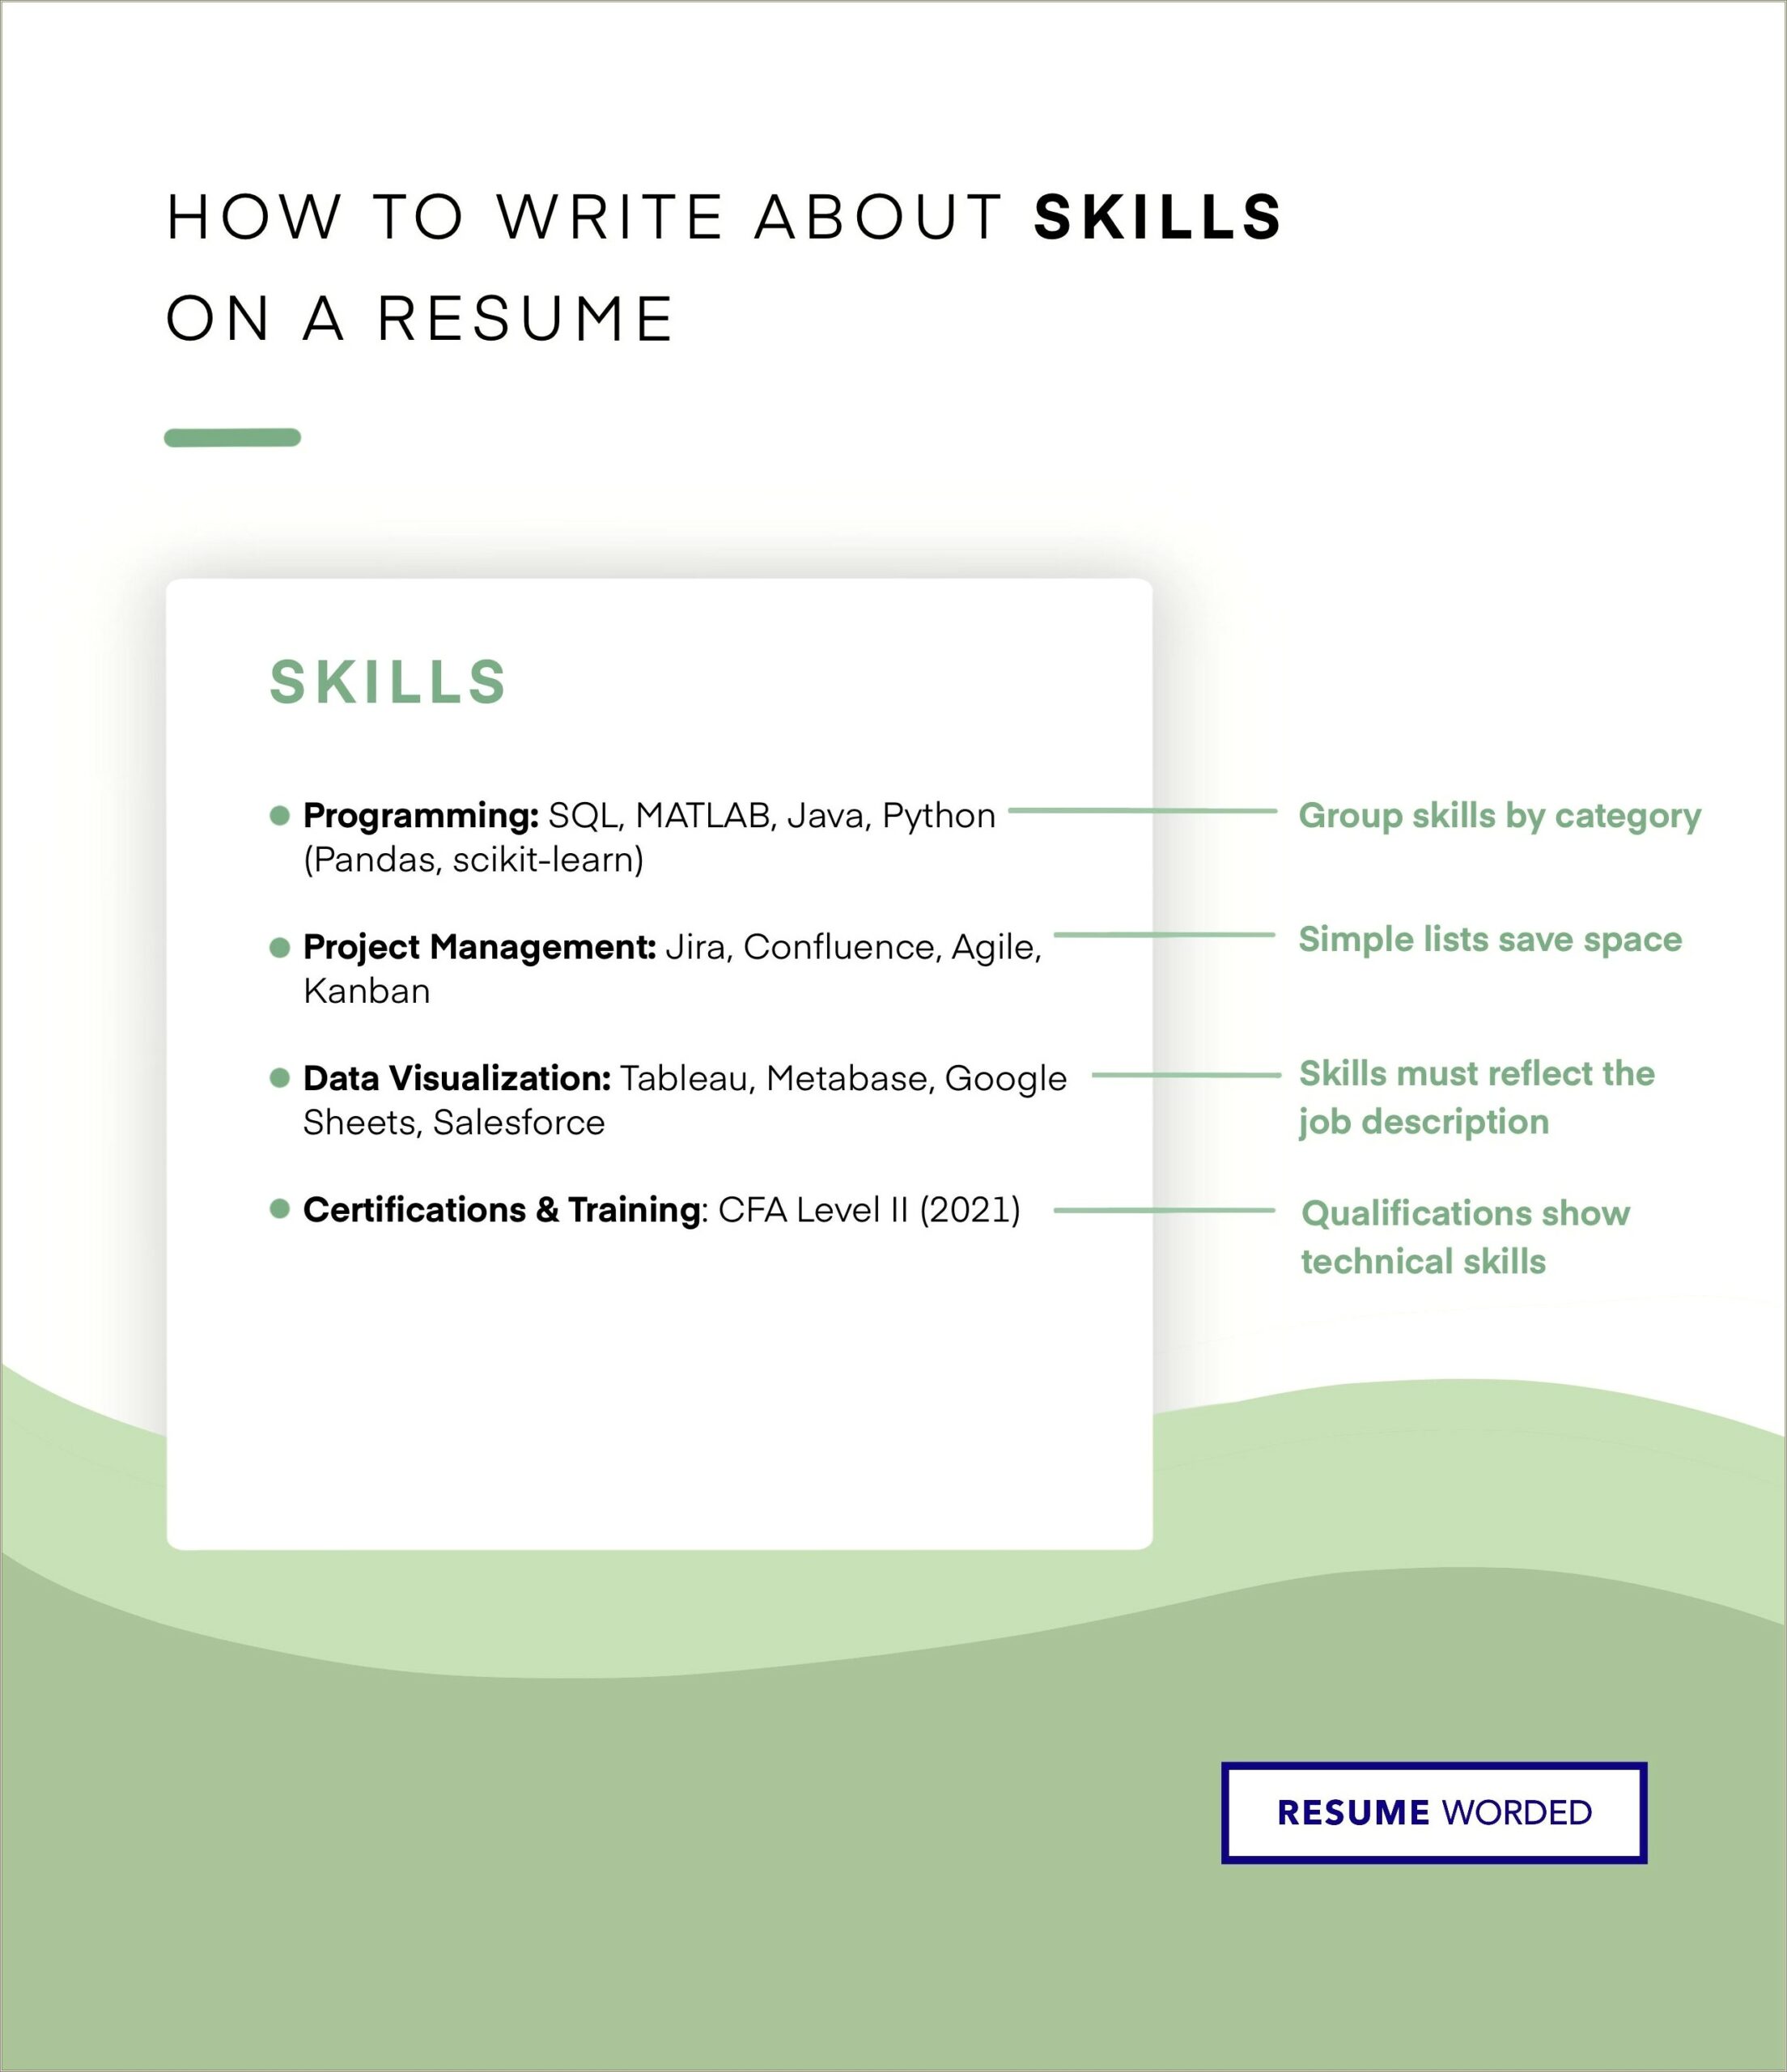 Should Education Come Before Skills On Resume